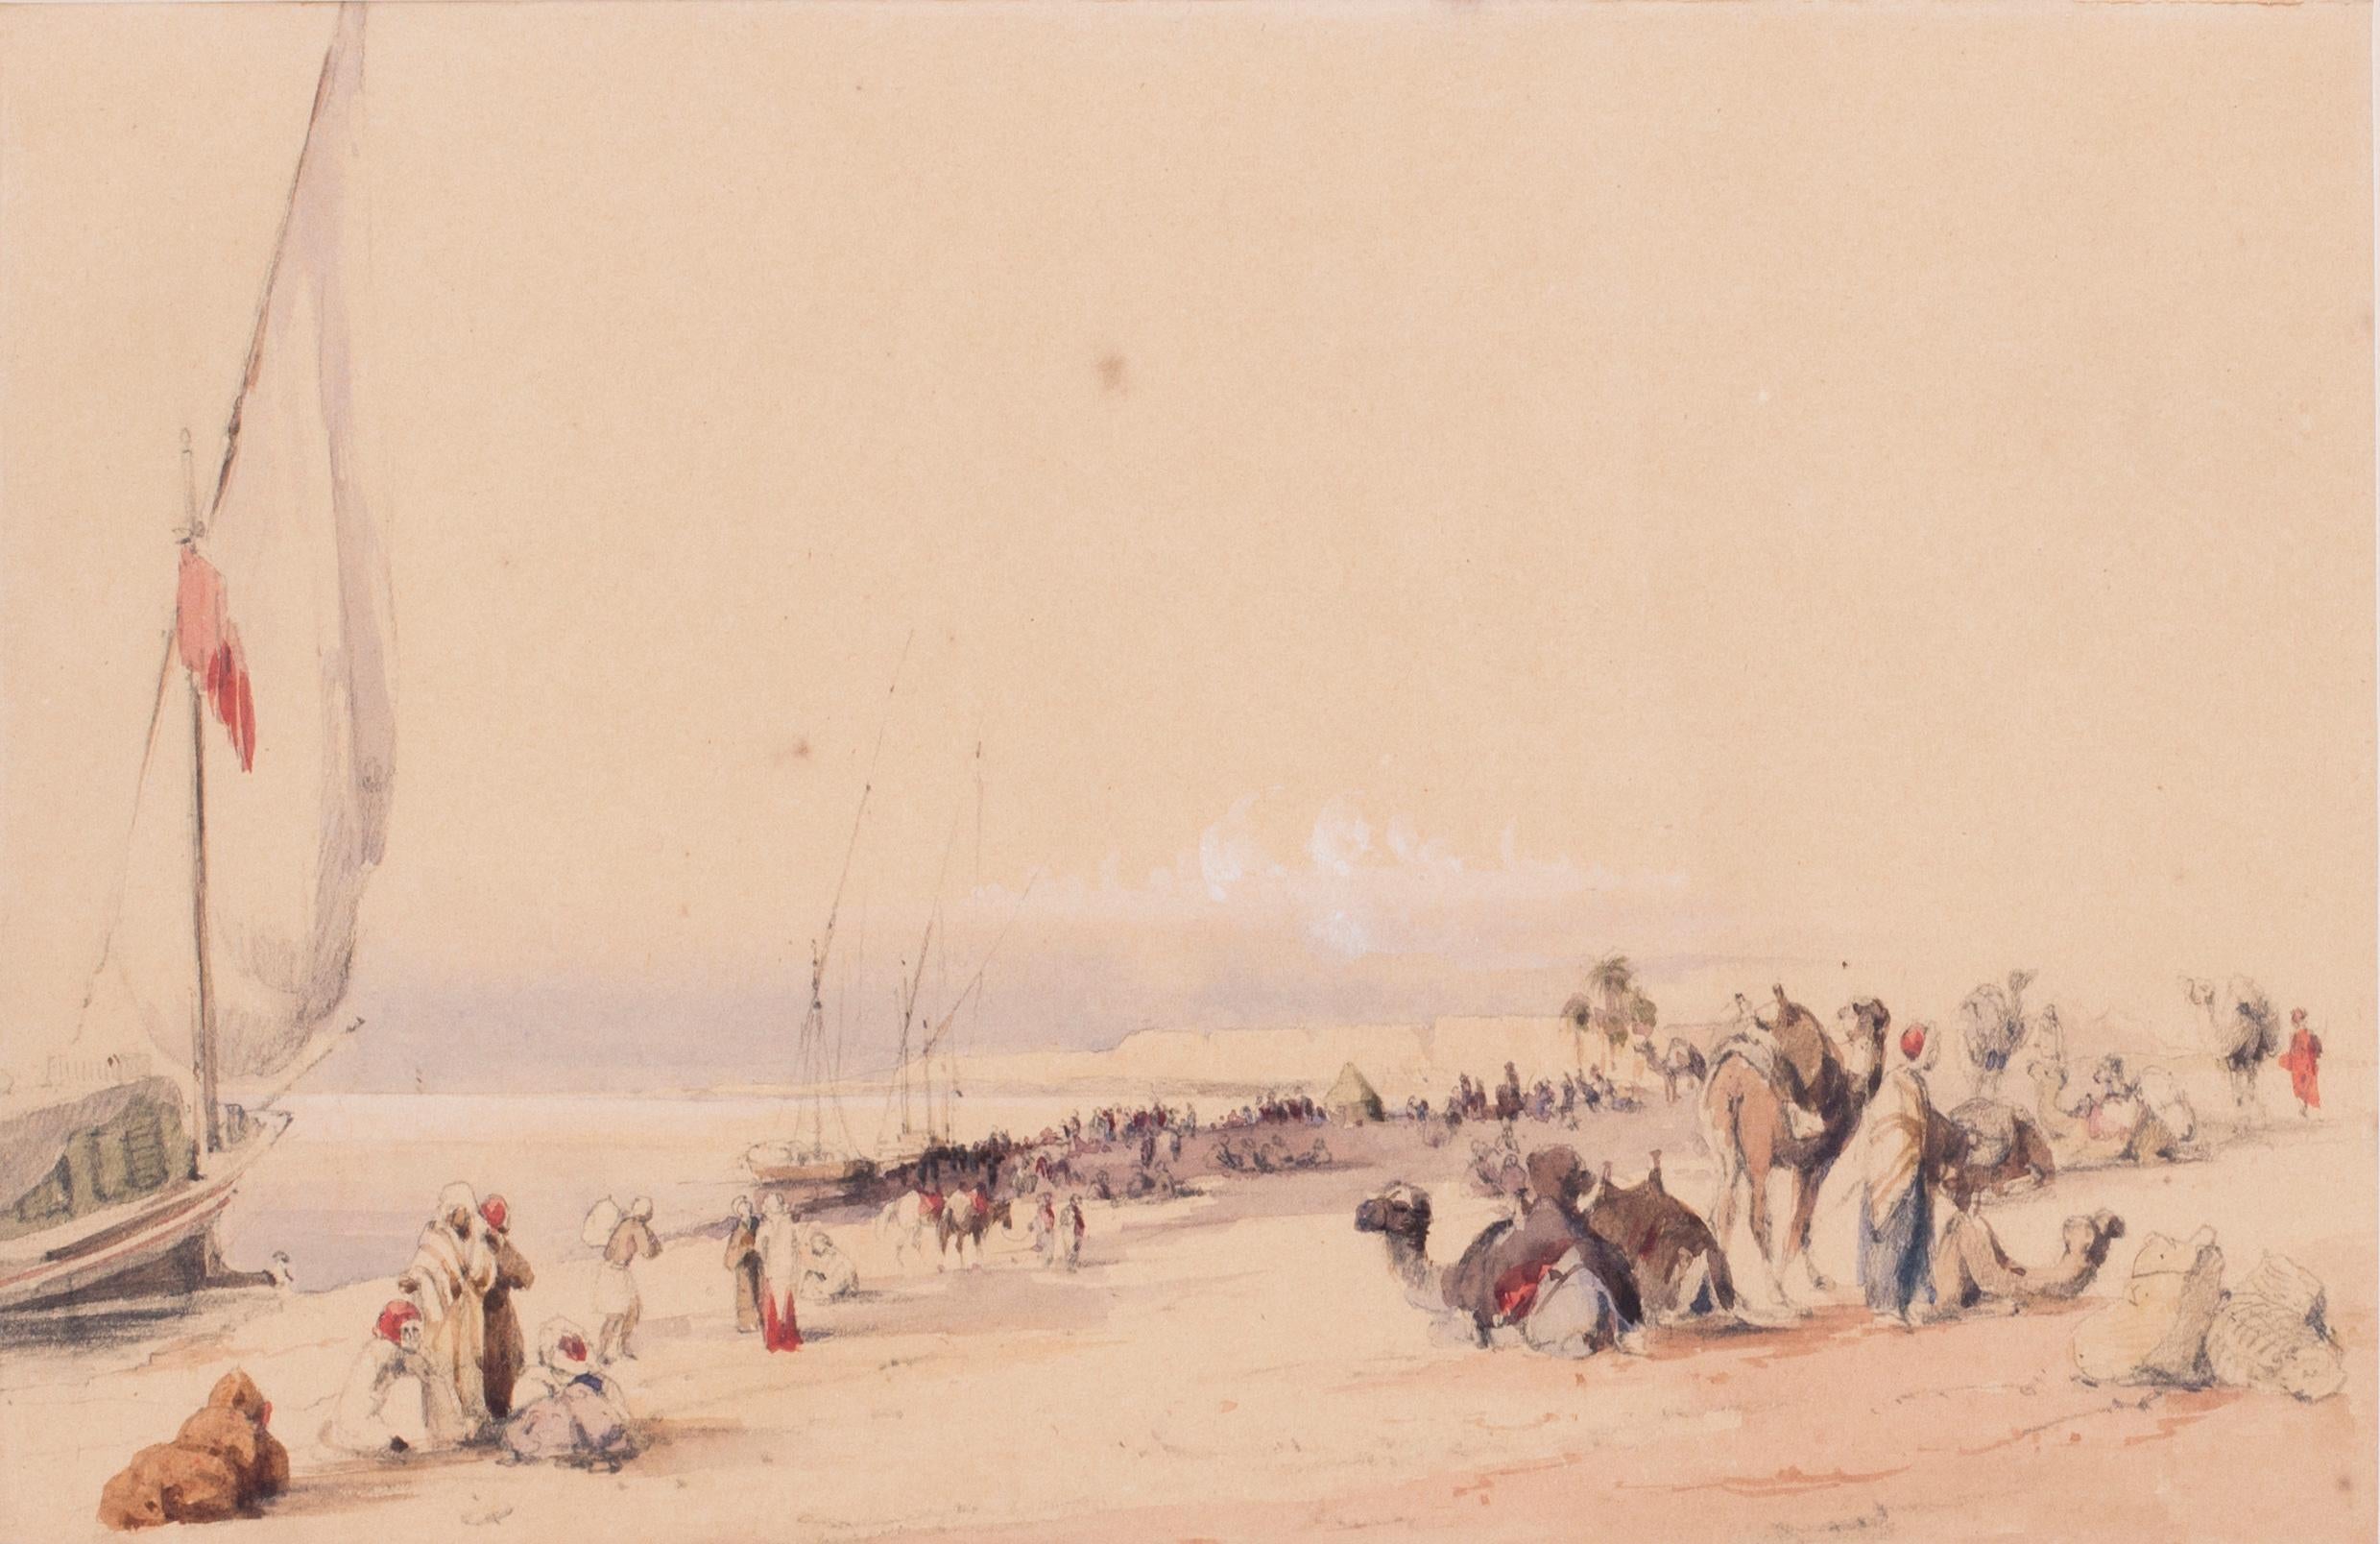 Mid 19th Century British watercolour of the Nile in Karnac, Luxor, Egypt - Art by Circle of Edward Lear